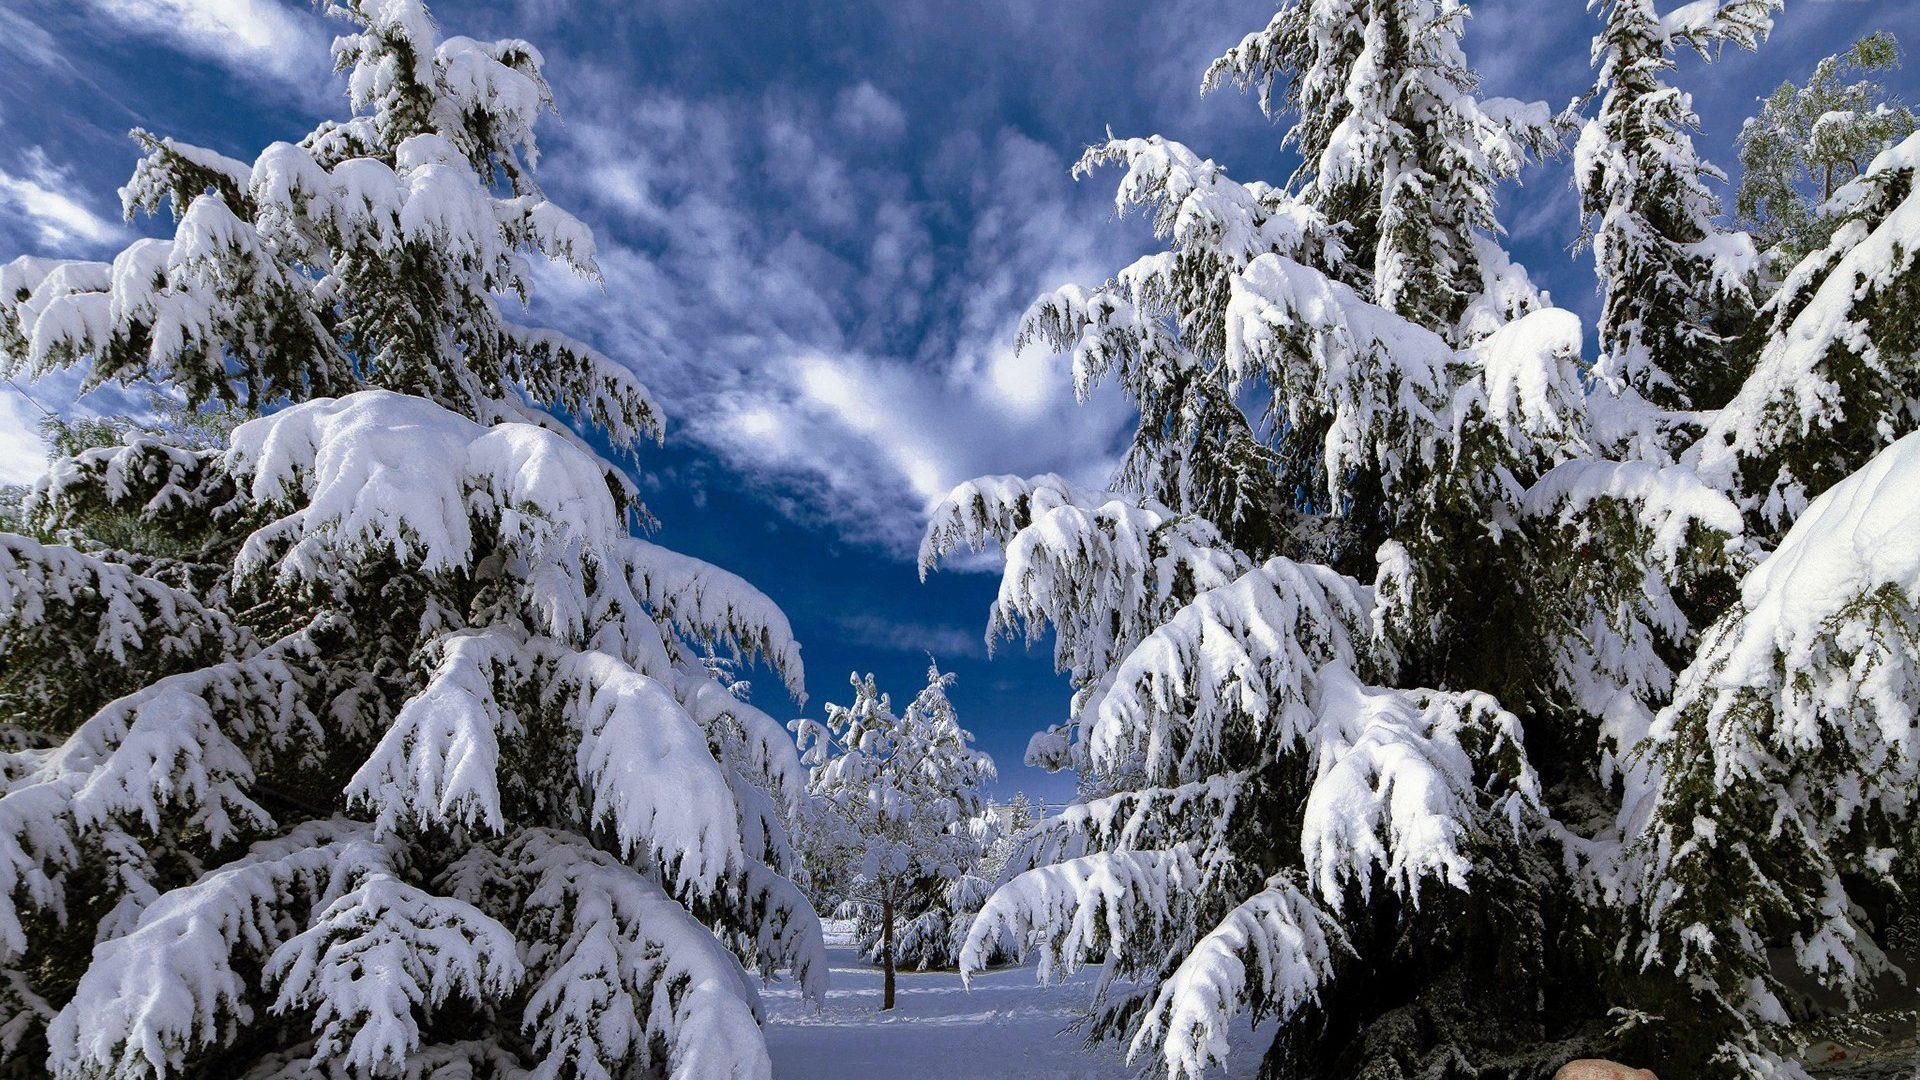 Pine Trees Snow Snowy Tree Winter Nature Landscapes